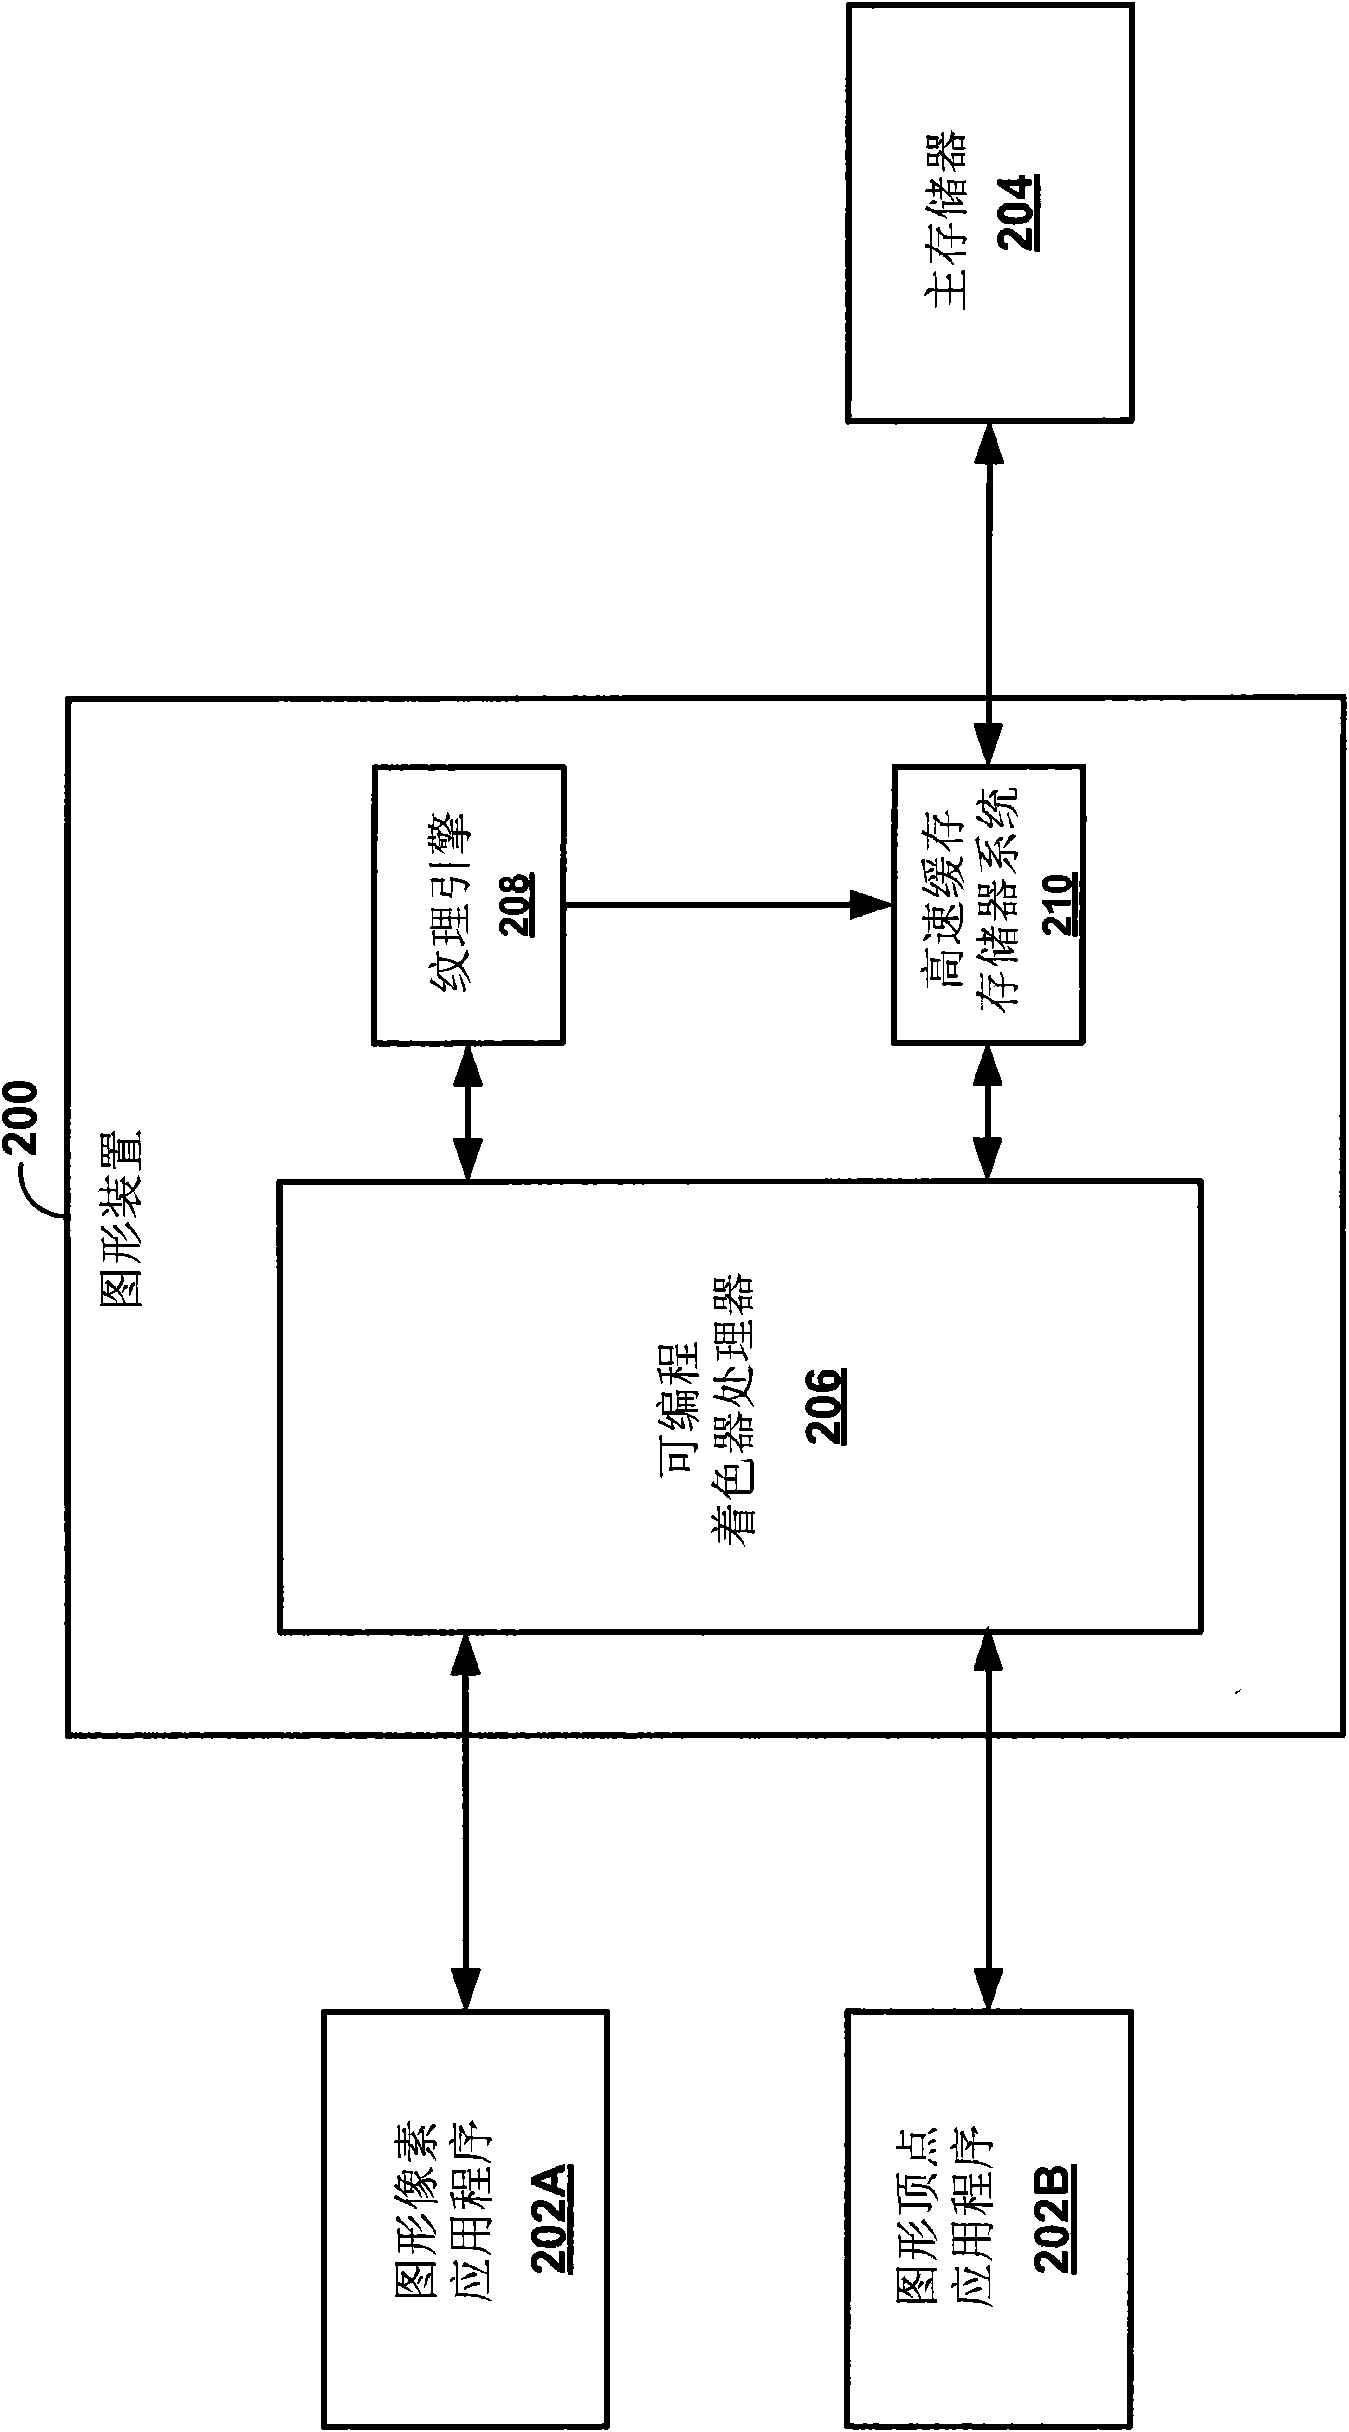 Programmable streaming processor with mixed precision instruction execution